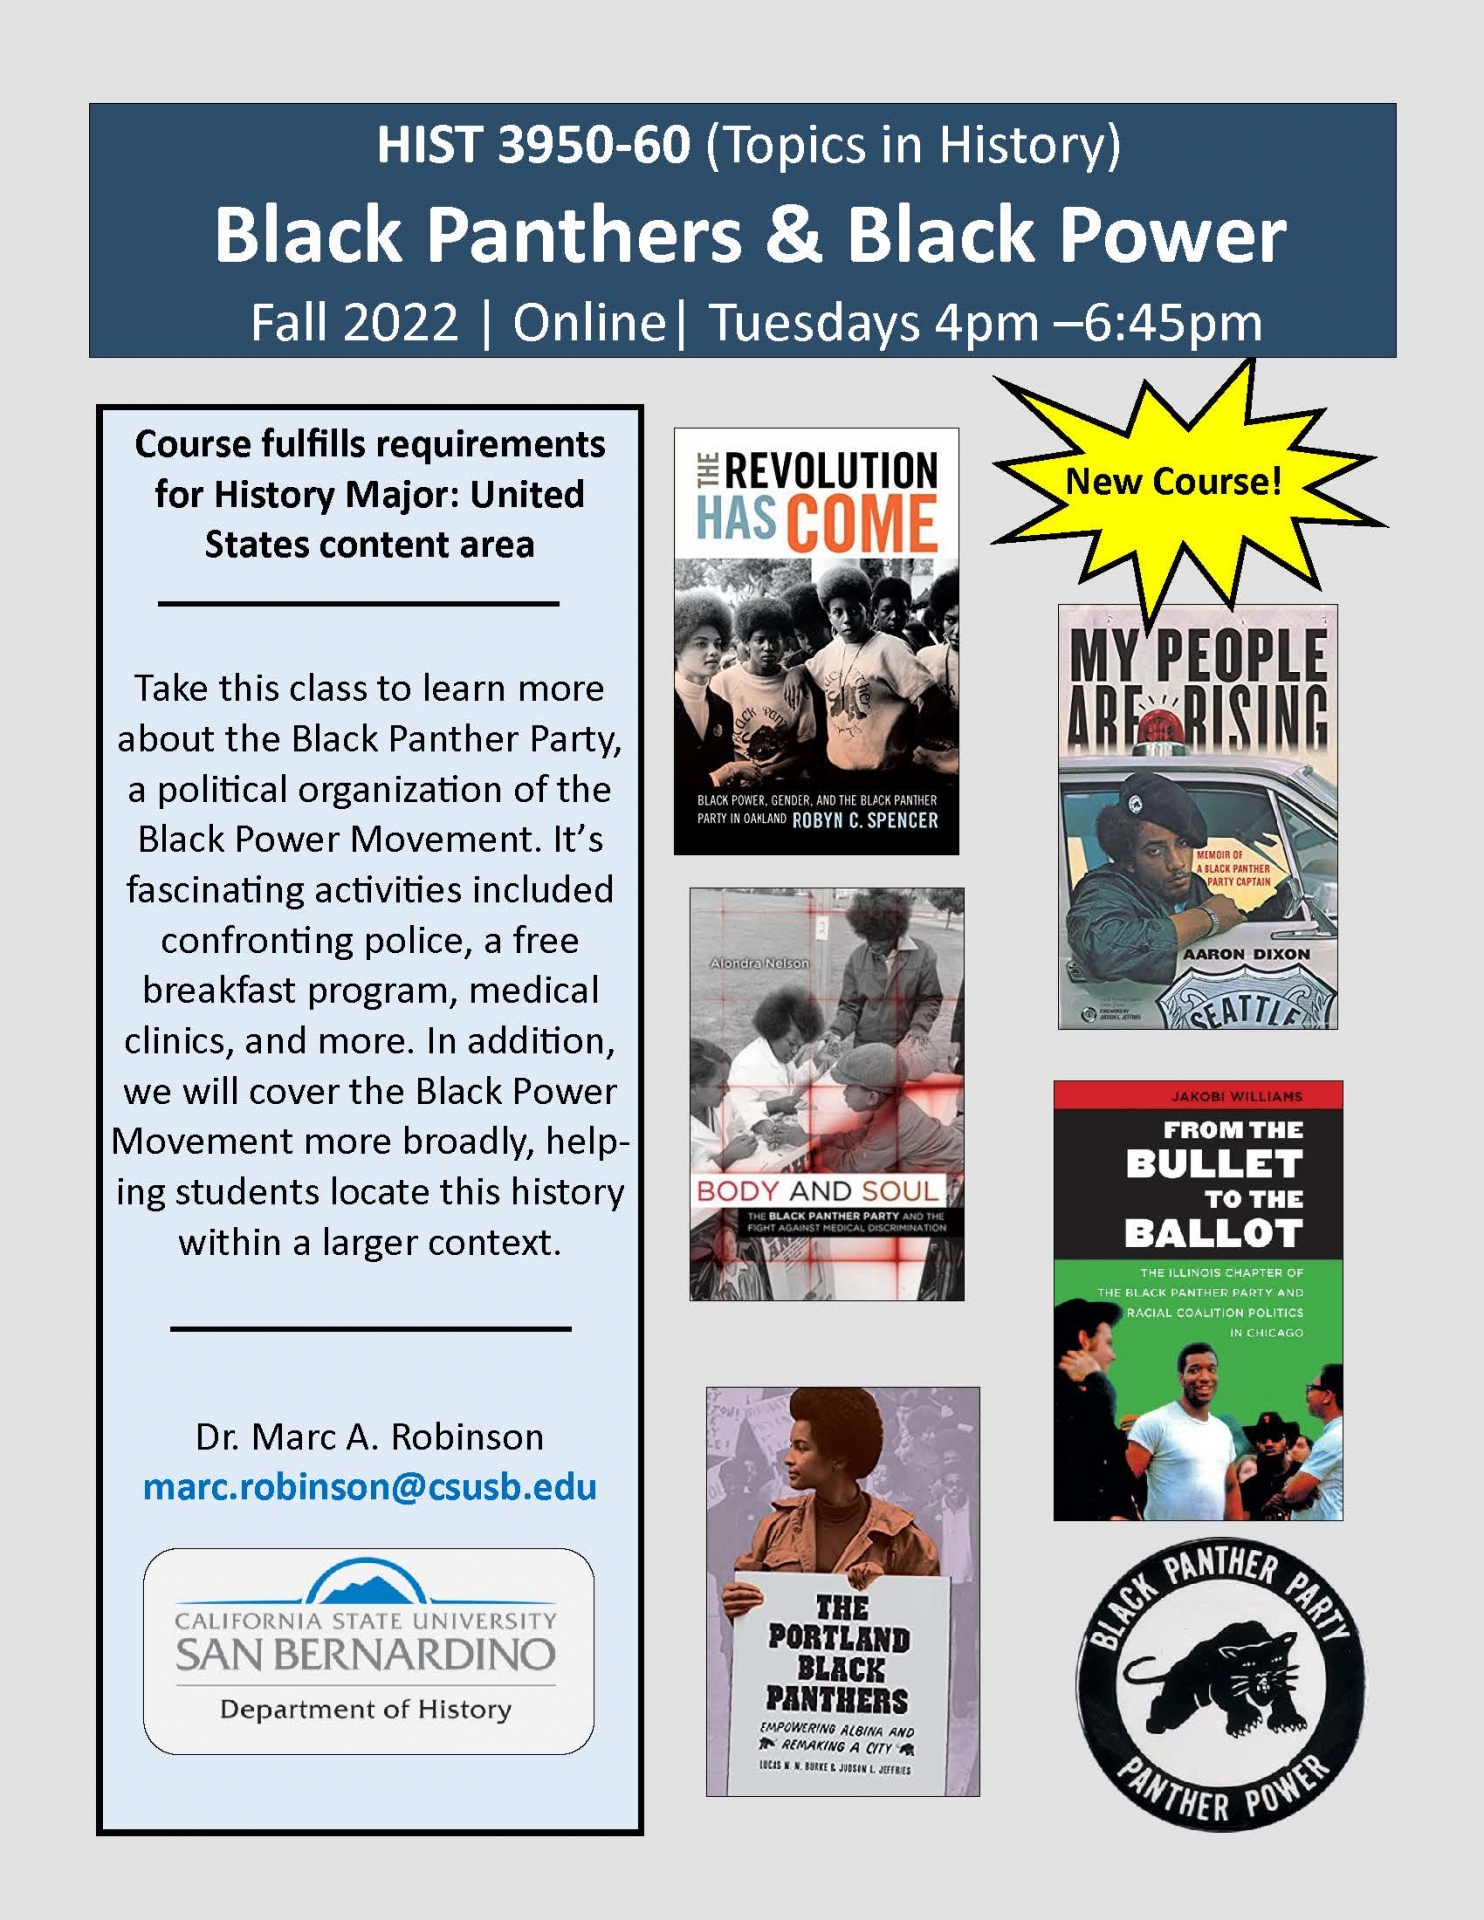 HIST 3950 - Black Panthers and Black Power course, Fall 2022,  Tues, 4 p.m. - 6:45 p.m.